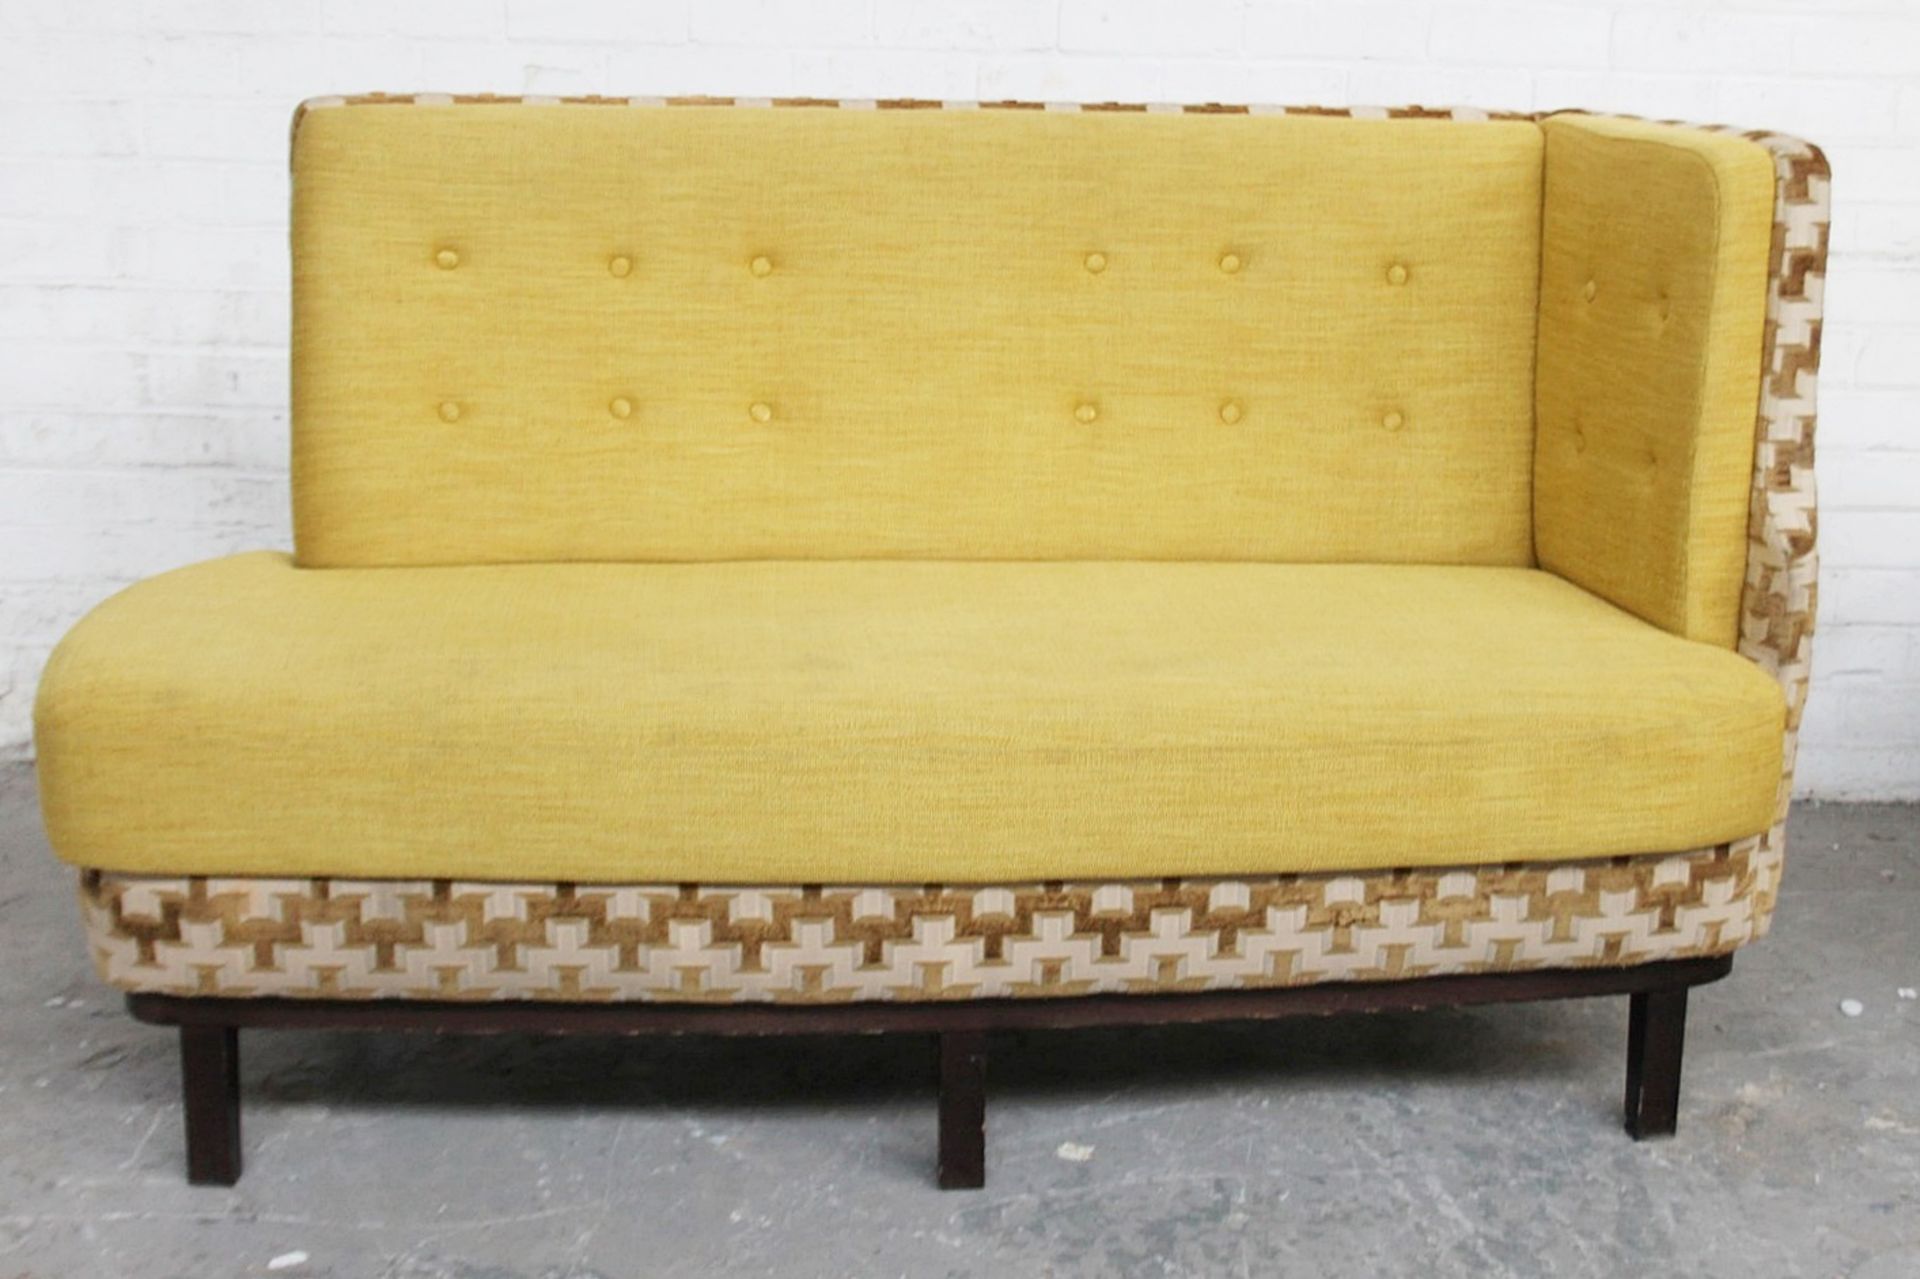 1 x Commercial Freestanding Right-Hand 2-Seater Bench, Upholstered In Premium Gold-Coloured Fabrics,